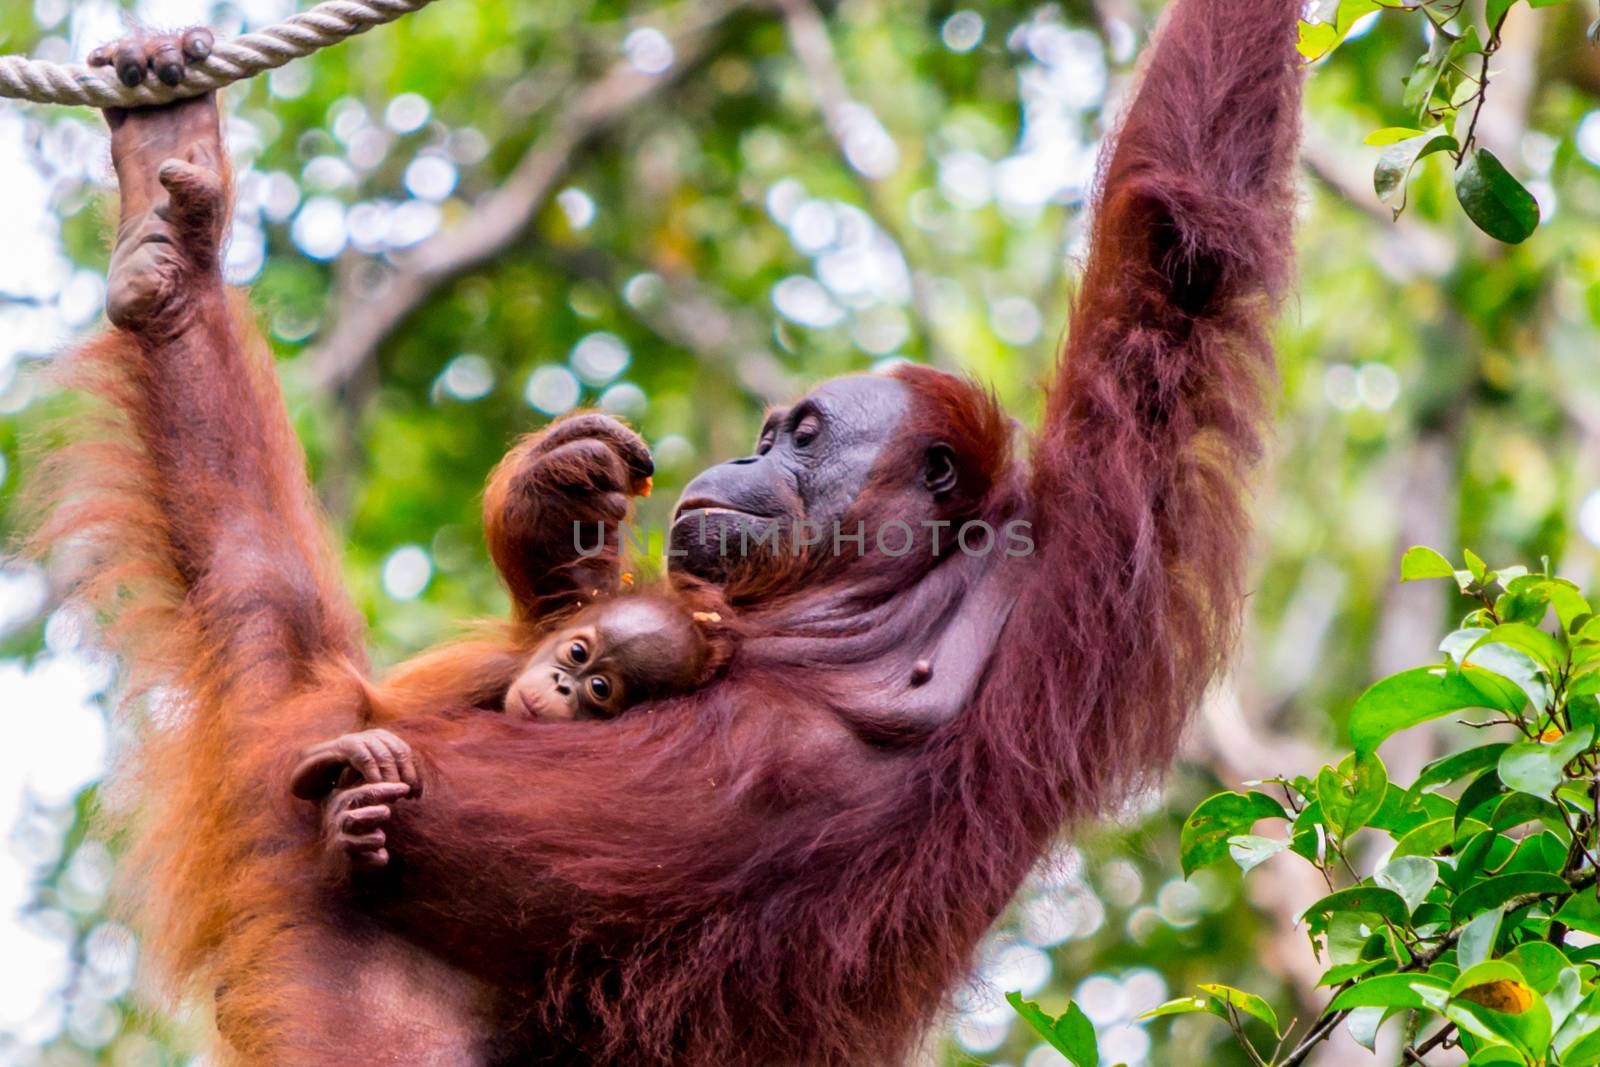 Orangutan hanging in a tree in the jungle of Borneo, holding a baby. Animal wildlife